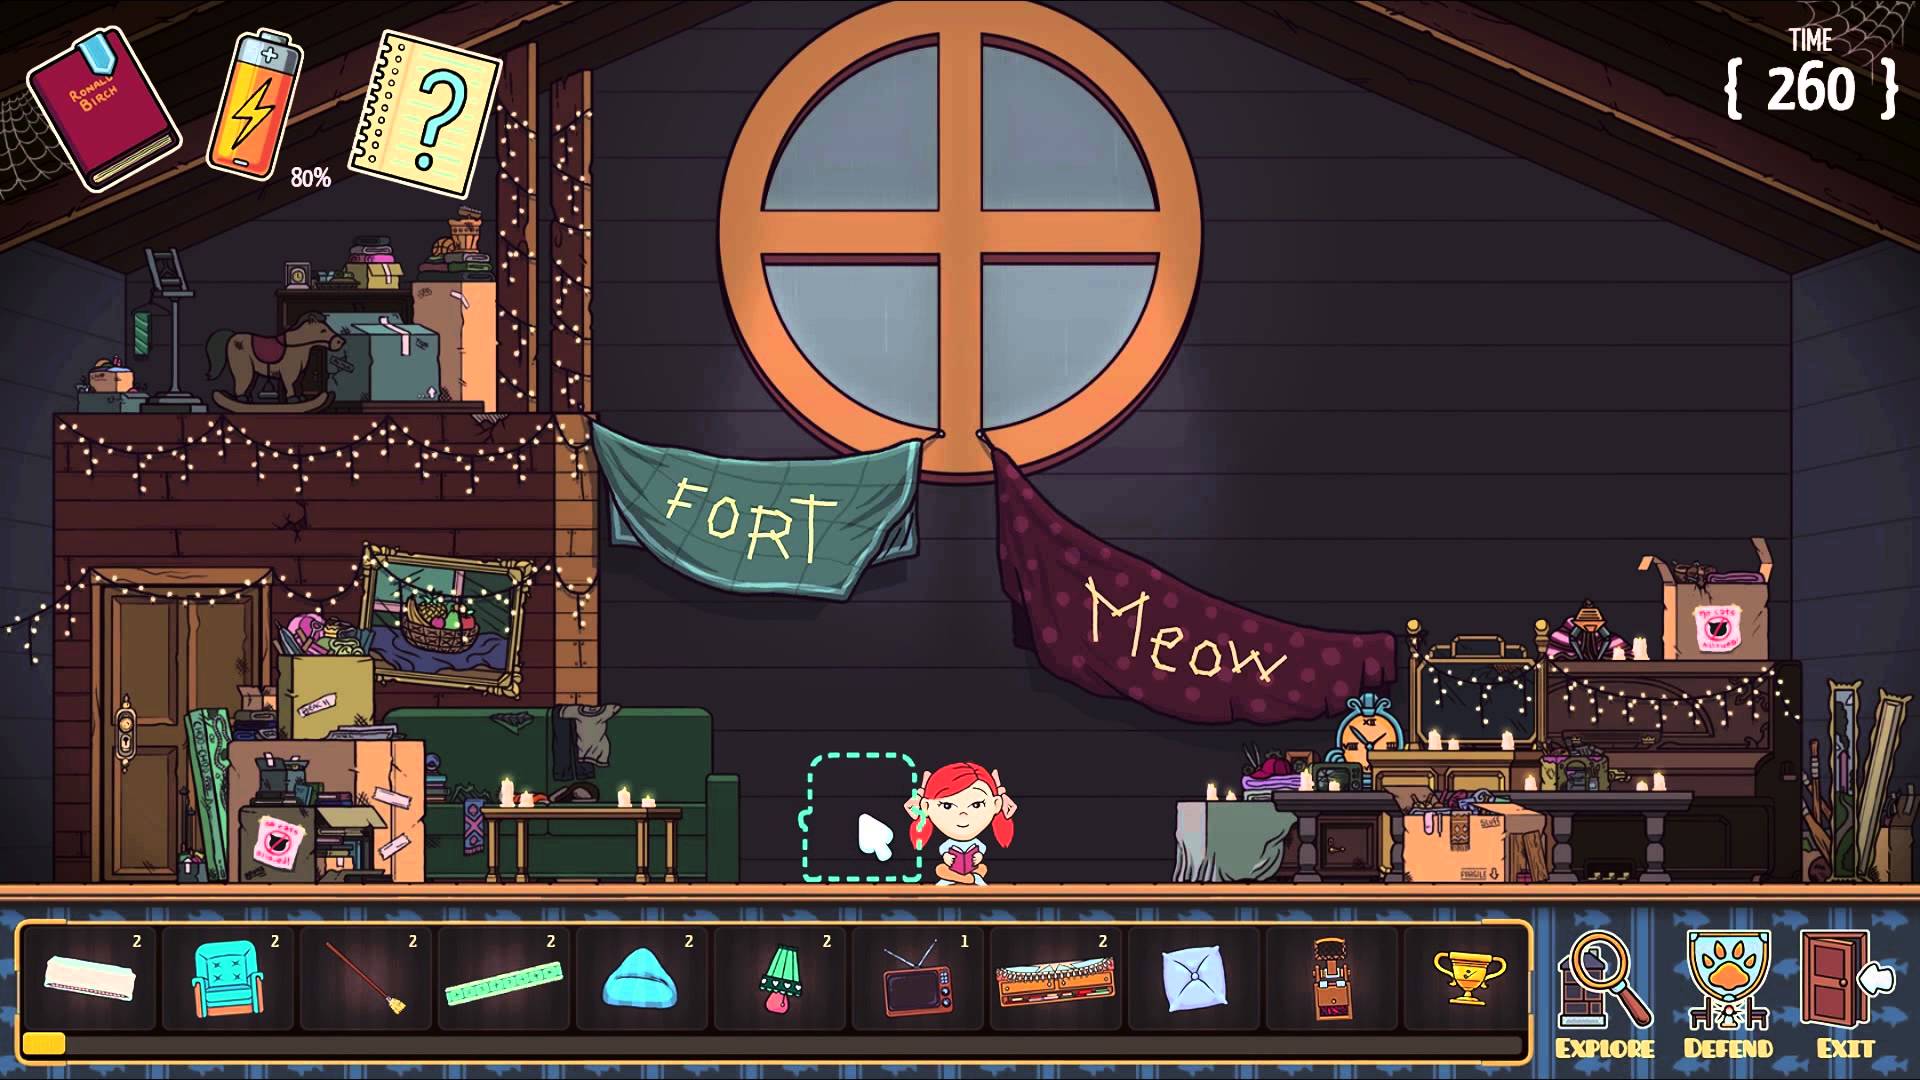 Indie Game Spotlight: Fort Meow